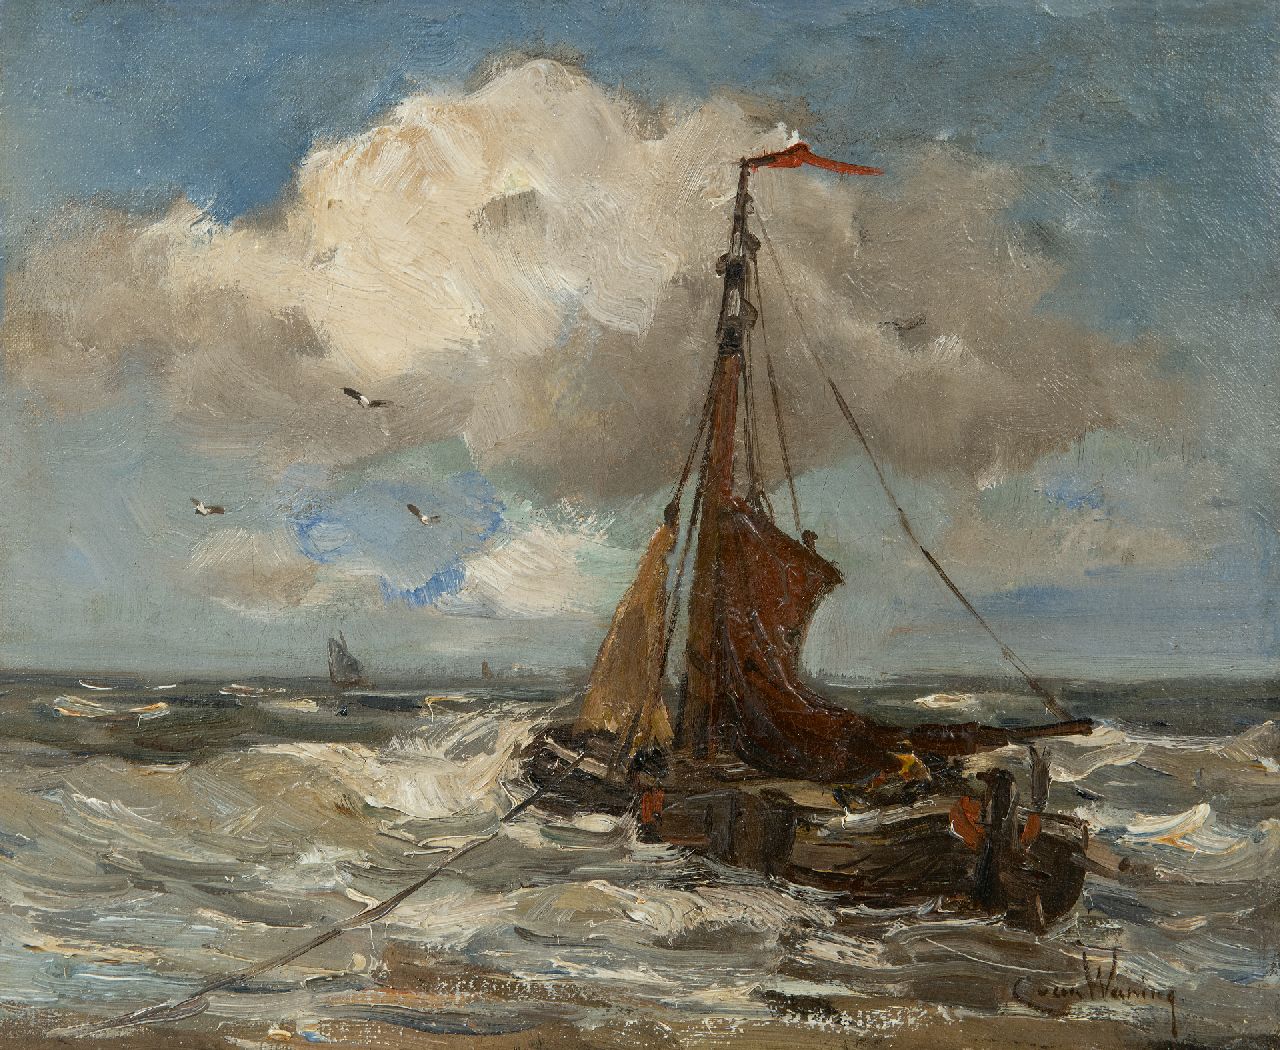 Waning C.A. van | Cornelis Anthonij 'Kees' van Waning | Paintings offered for sale | Fishing barge moored in the surf, oil on canvas 25.2 x 31.0 cm, signed l.r.